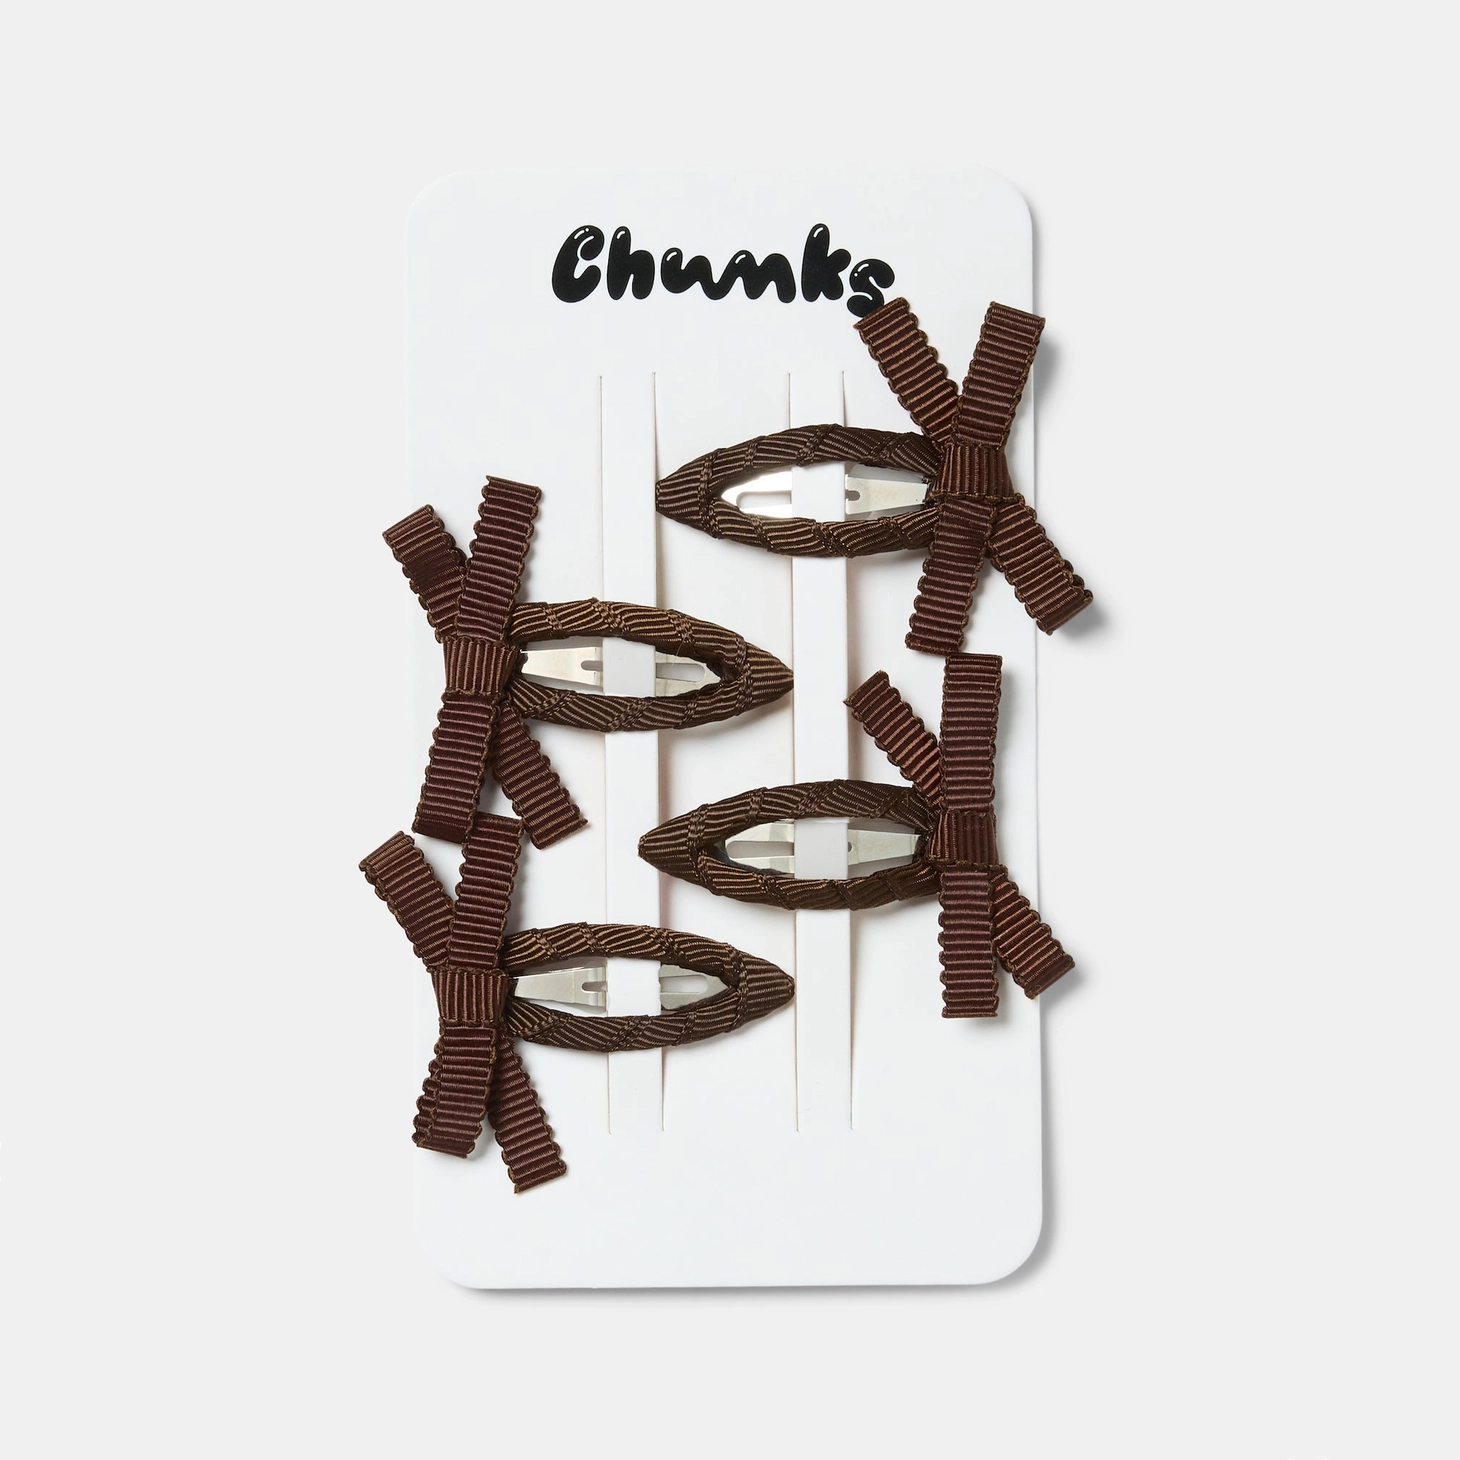 Bow Snap Clips in Chocolate